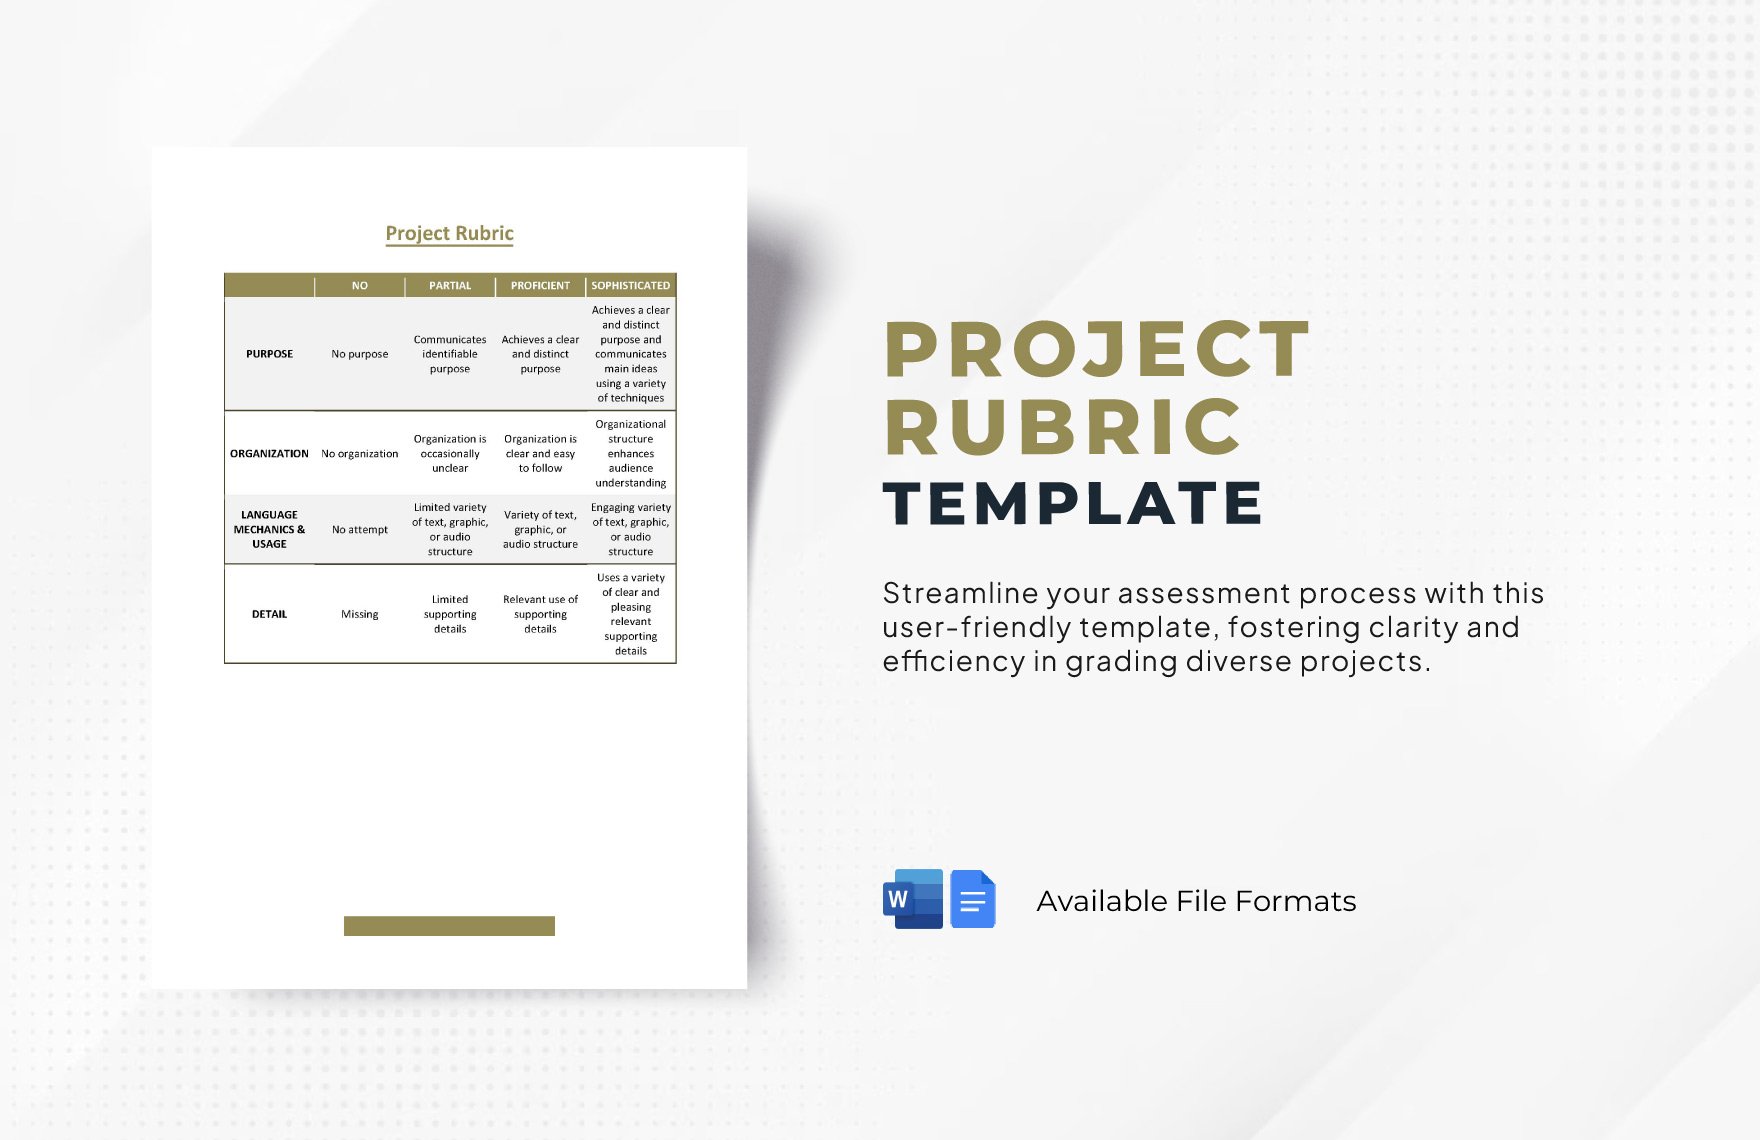 Free Project Rubric Template in Word, Google Docs